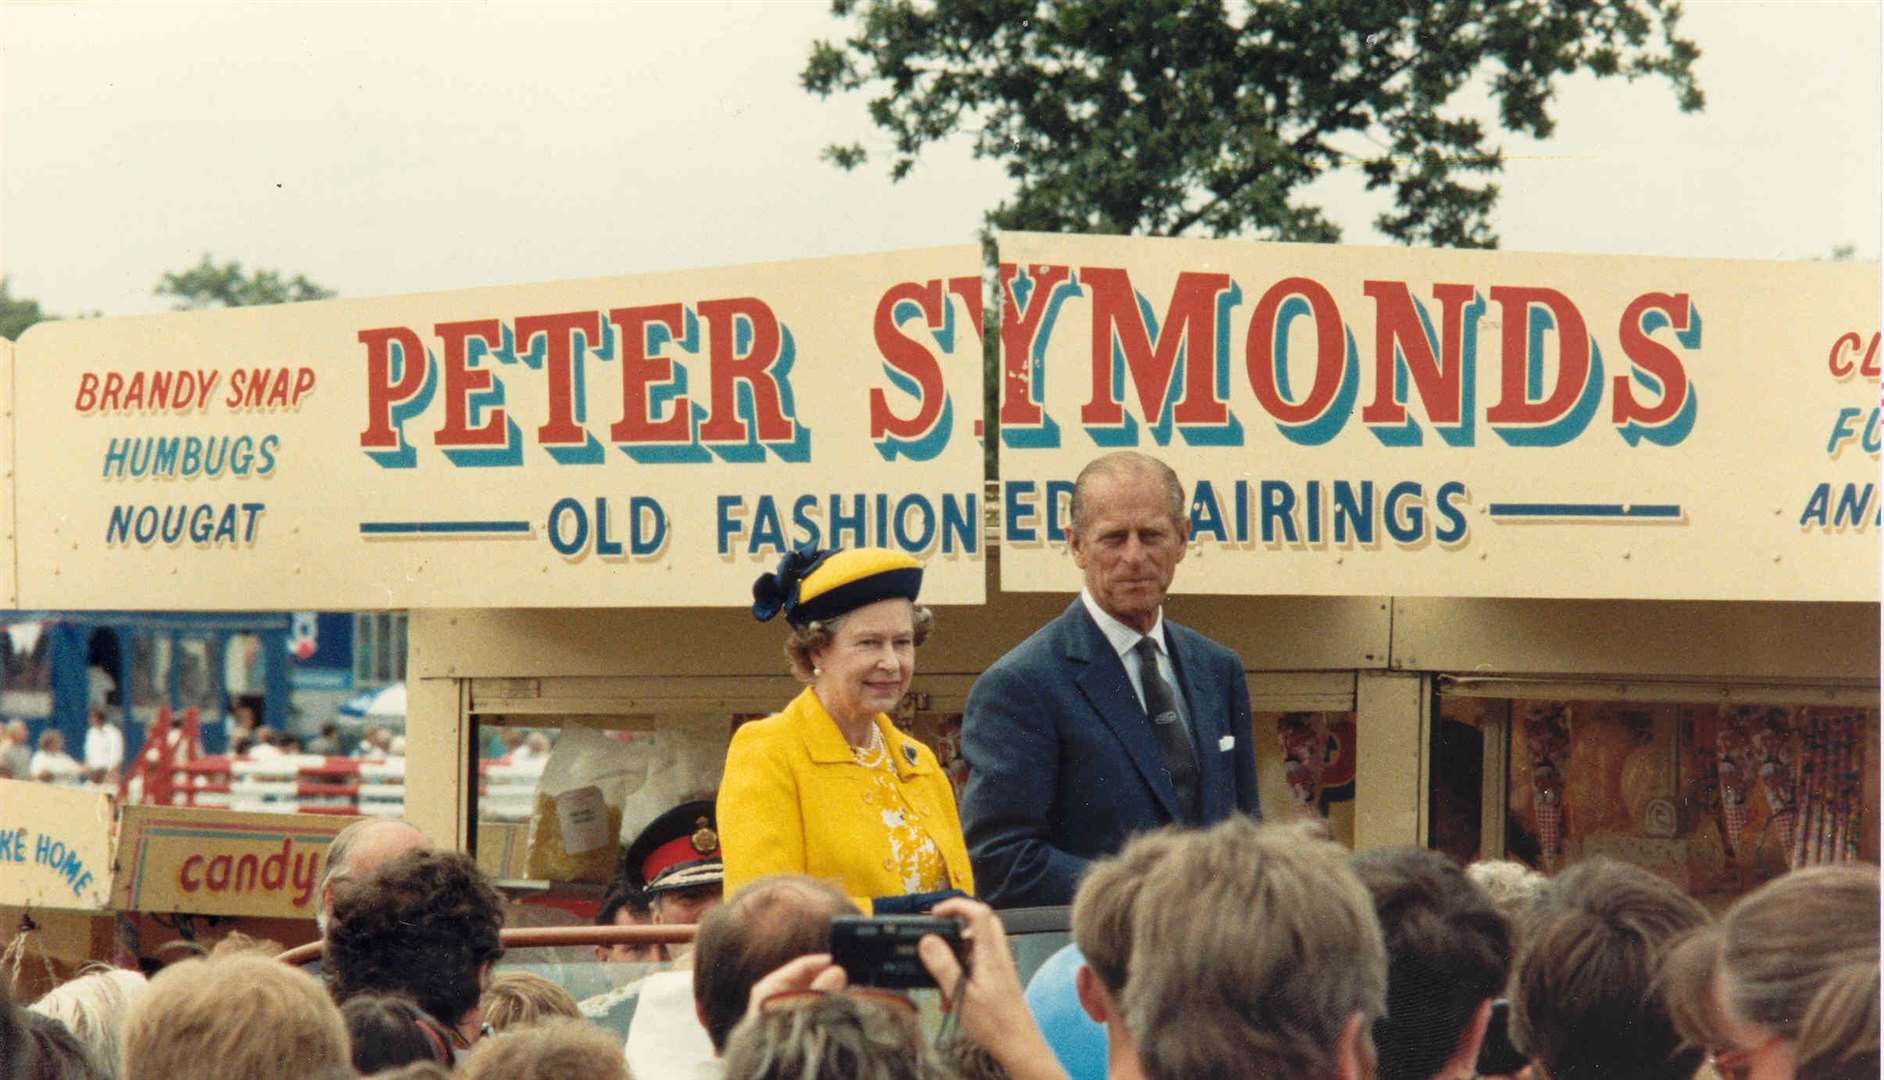 The Queen and Duke of Edinburgh visiting the County Show in Detling in July 1989